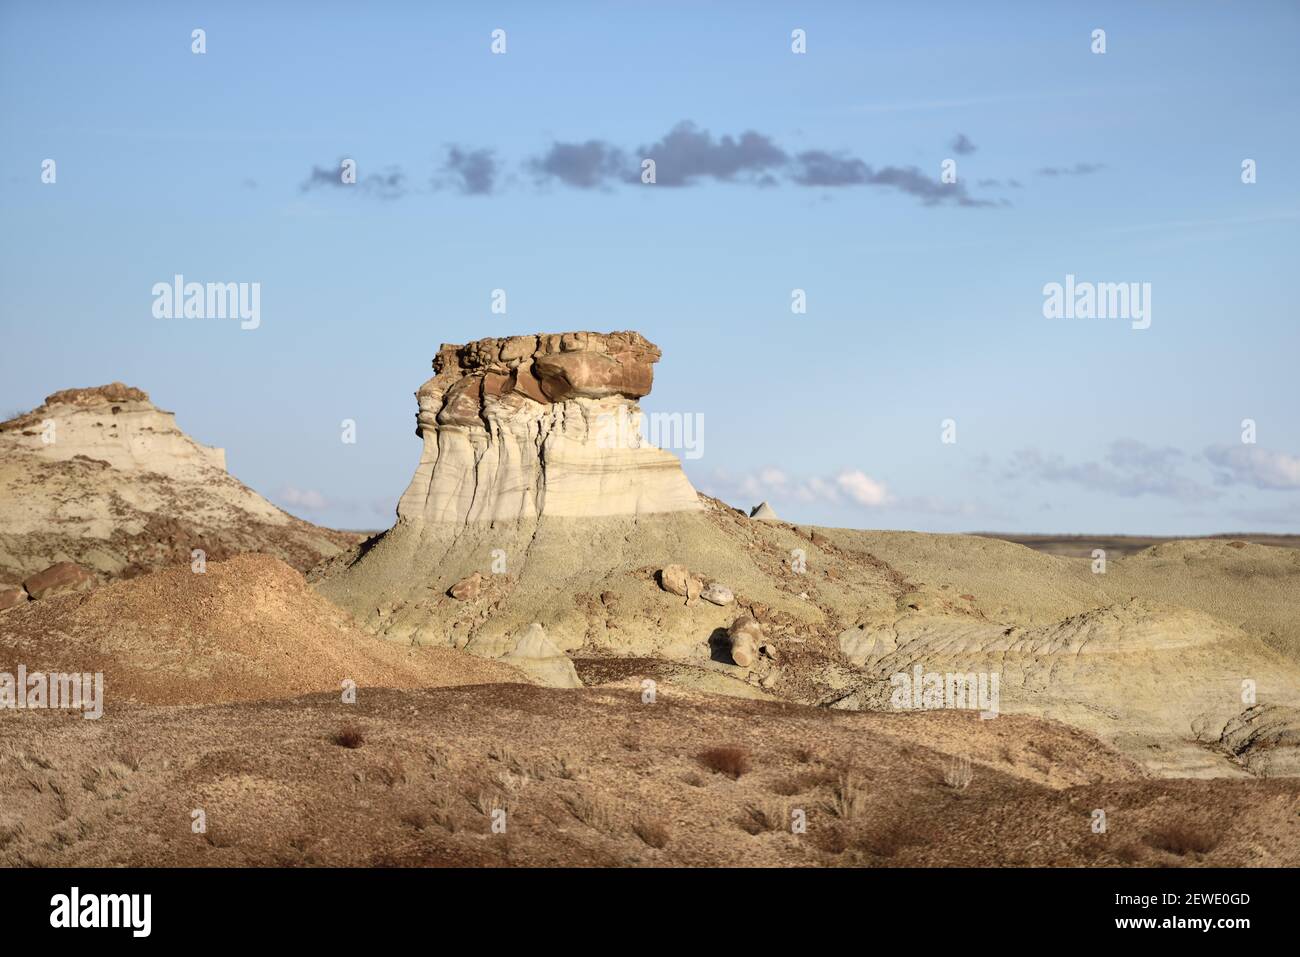 A formation in the Bisti/De-Na-Zin Wilderness in New Mexico pictured on April 9, 2016. The area was once a delta that lay to the west of the Western Interior Seaway 70 million years ago, and the badlands  were formed by the erosion of the sandy Ojo Alamo Formation. (Photo by Alex Milan Tracy) *** Please Use Credit from Credit Field *** Stock Photo